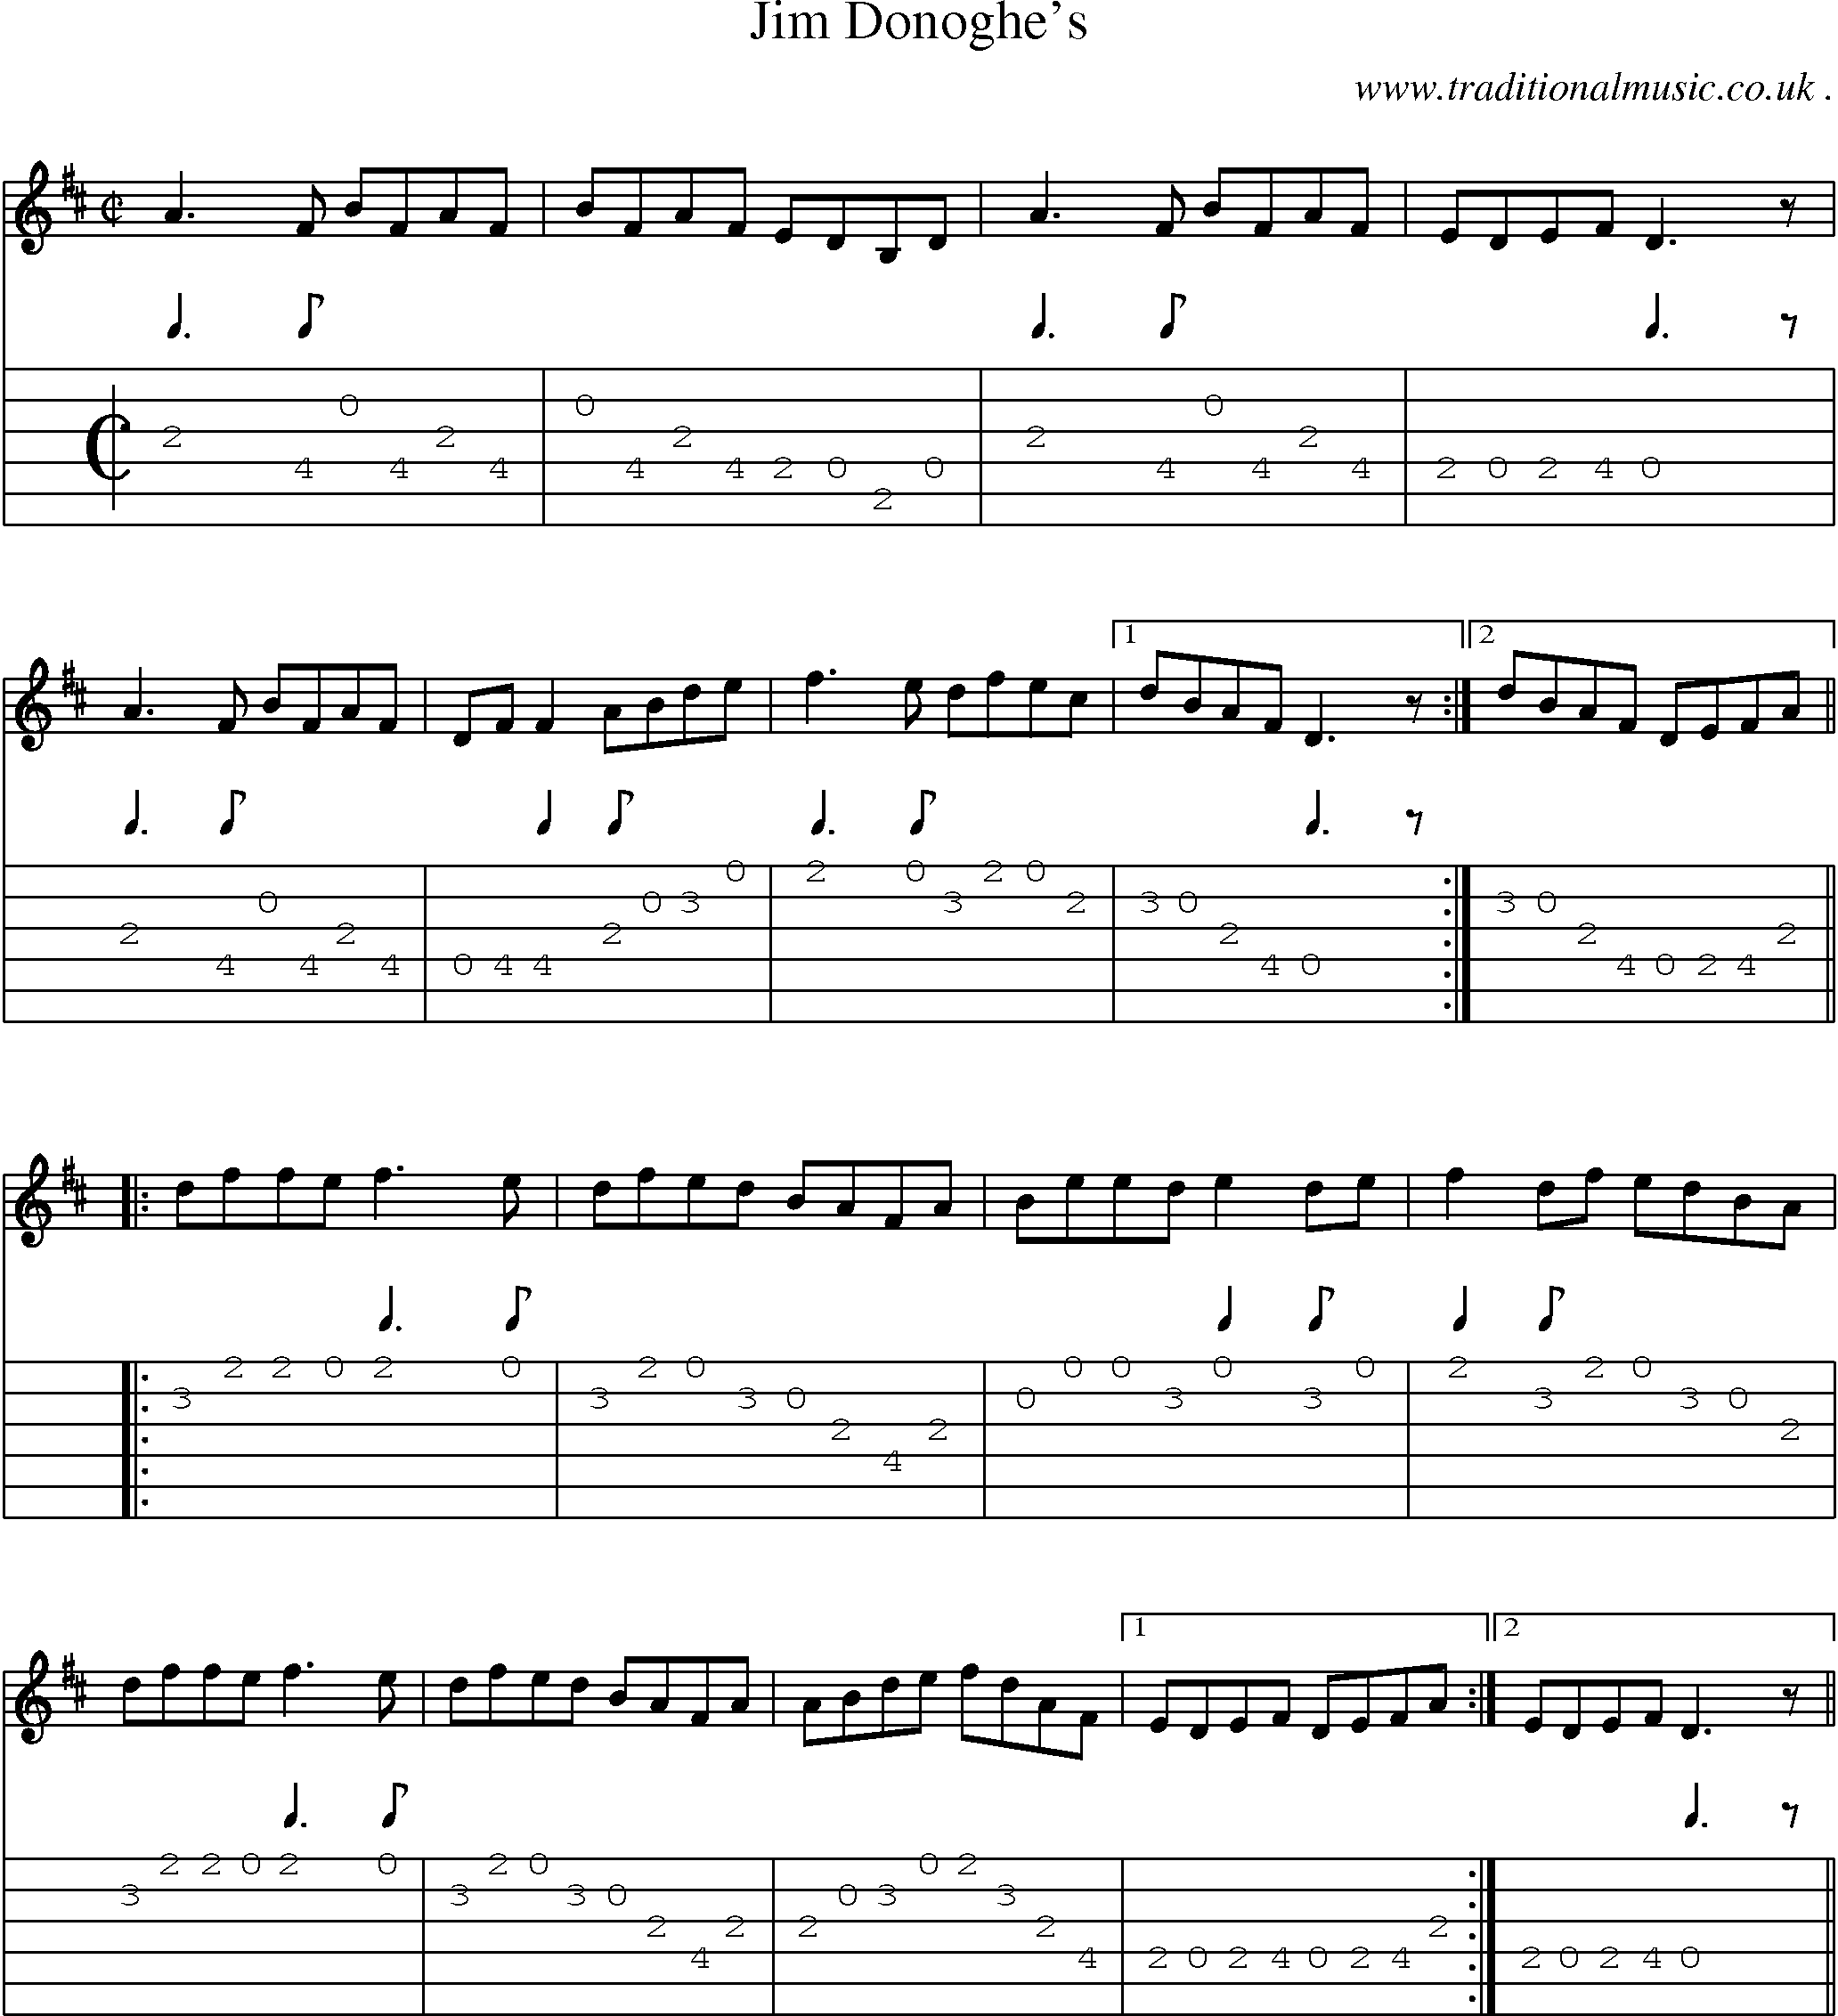 Sheet-Music and Guitar Tabs for Jim Donoghes